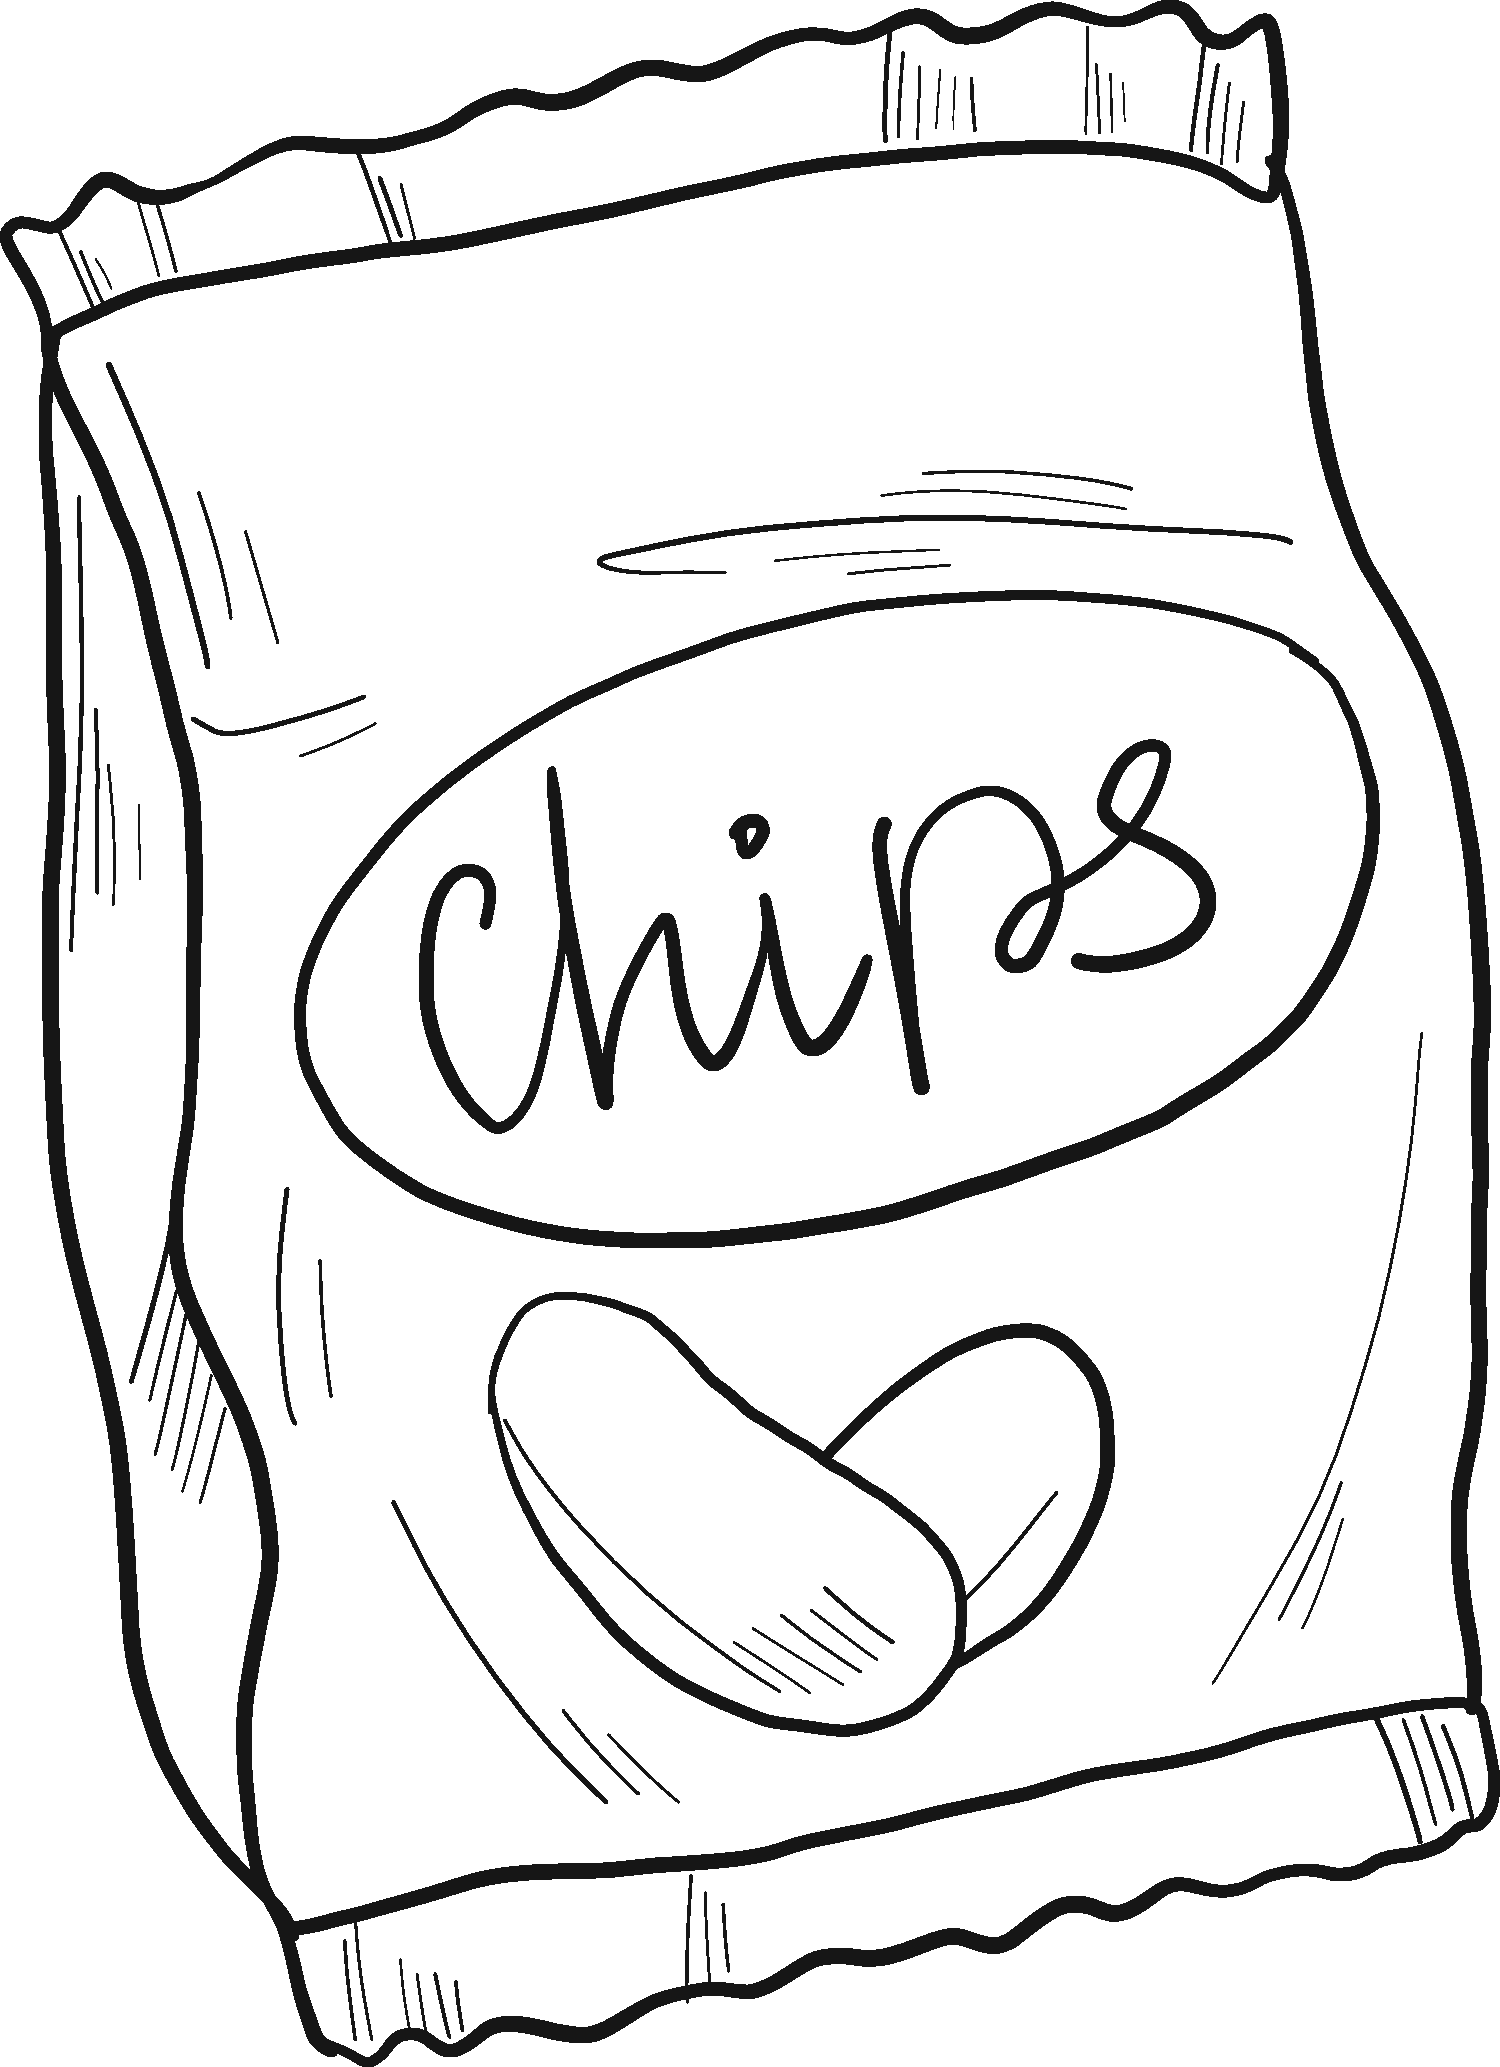 Chips coloring page - ColouringPages